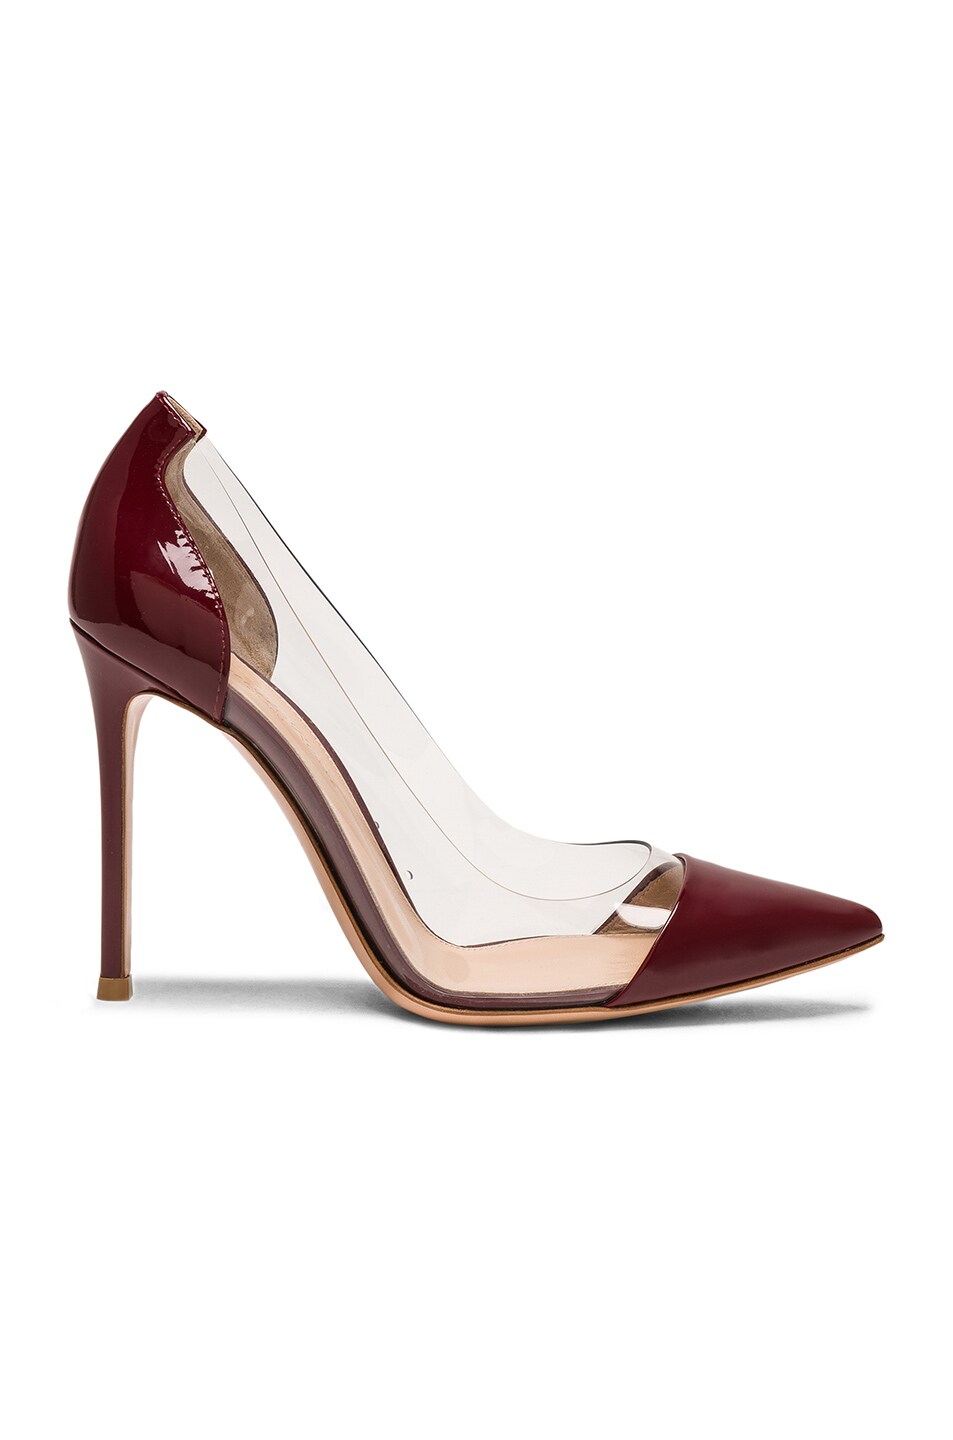 Image 1 of Gianvito Rossi for FWRD Patent Leather & Plexi Pumps in Syrah